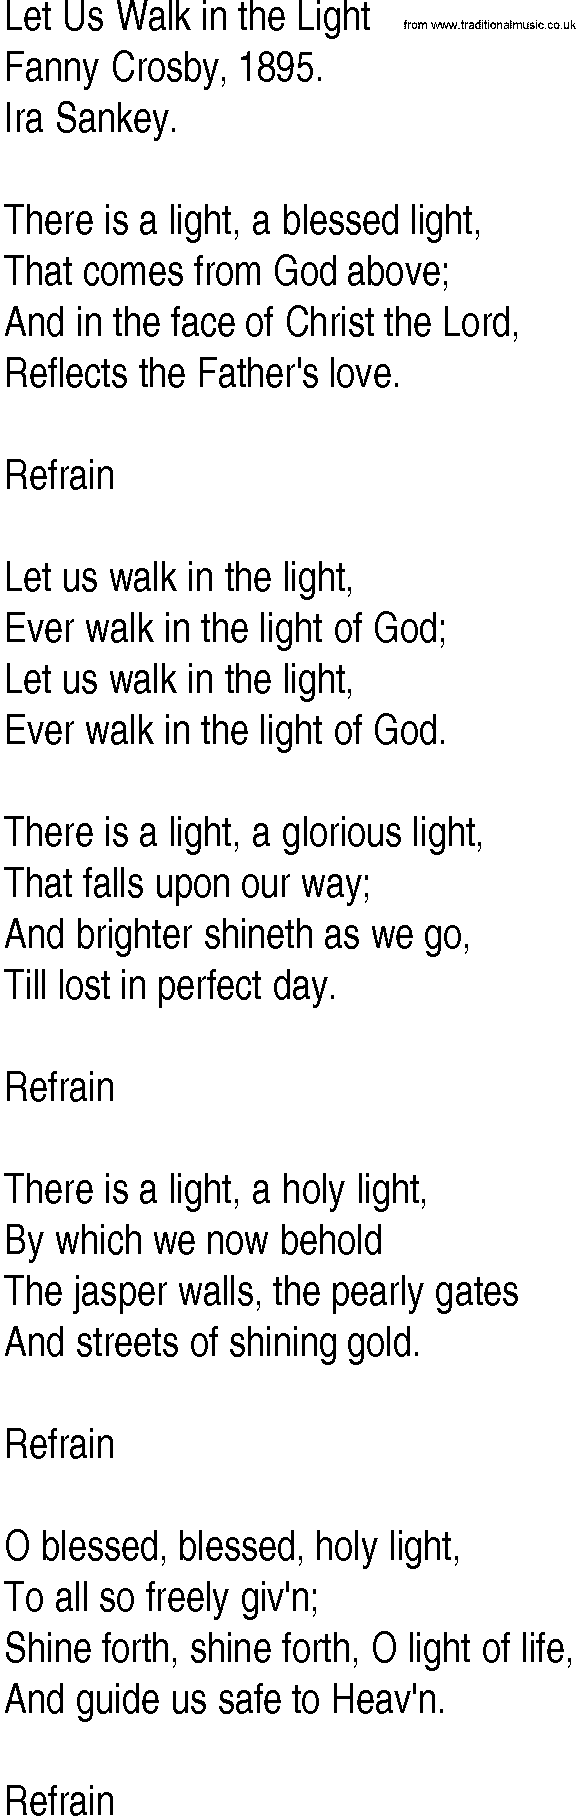 Hymn and Gospel Song: Let Us Walk in the Light by Fanny Crosby lyrics